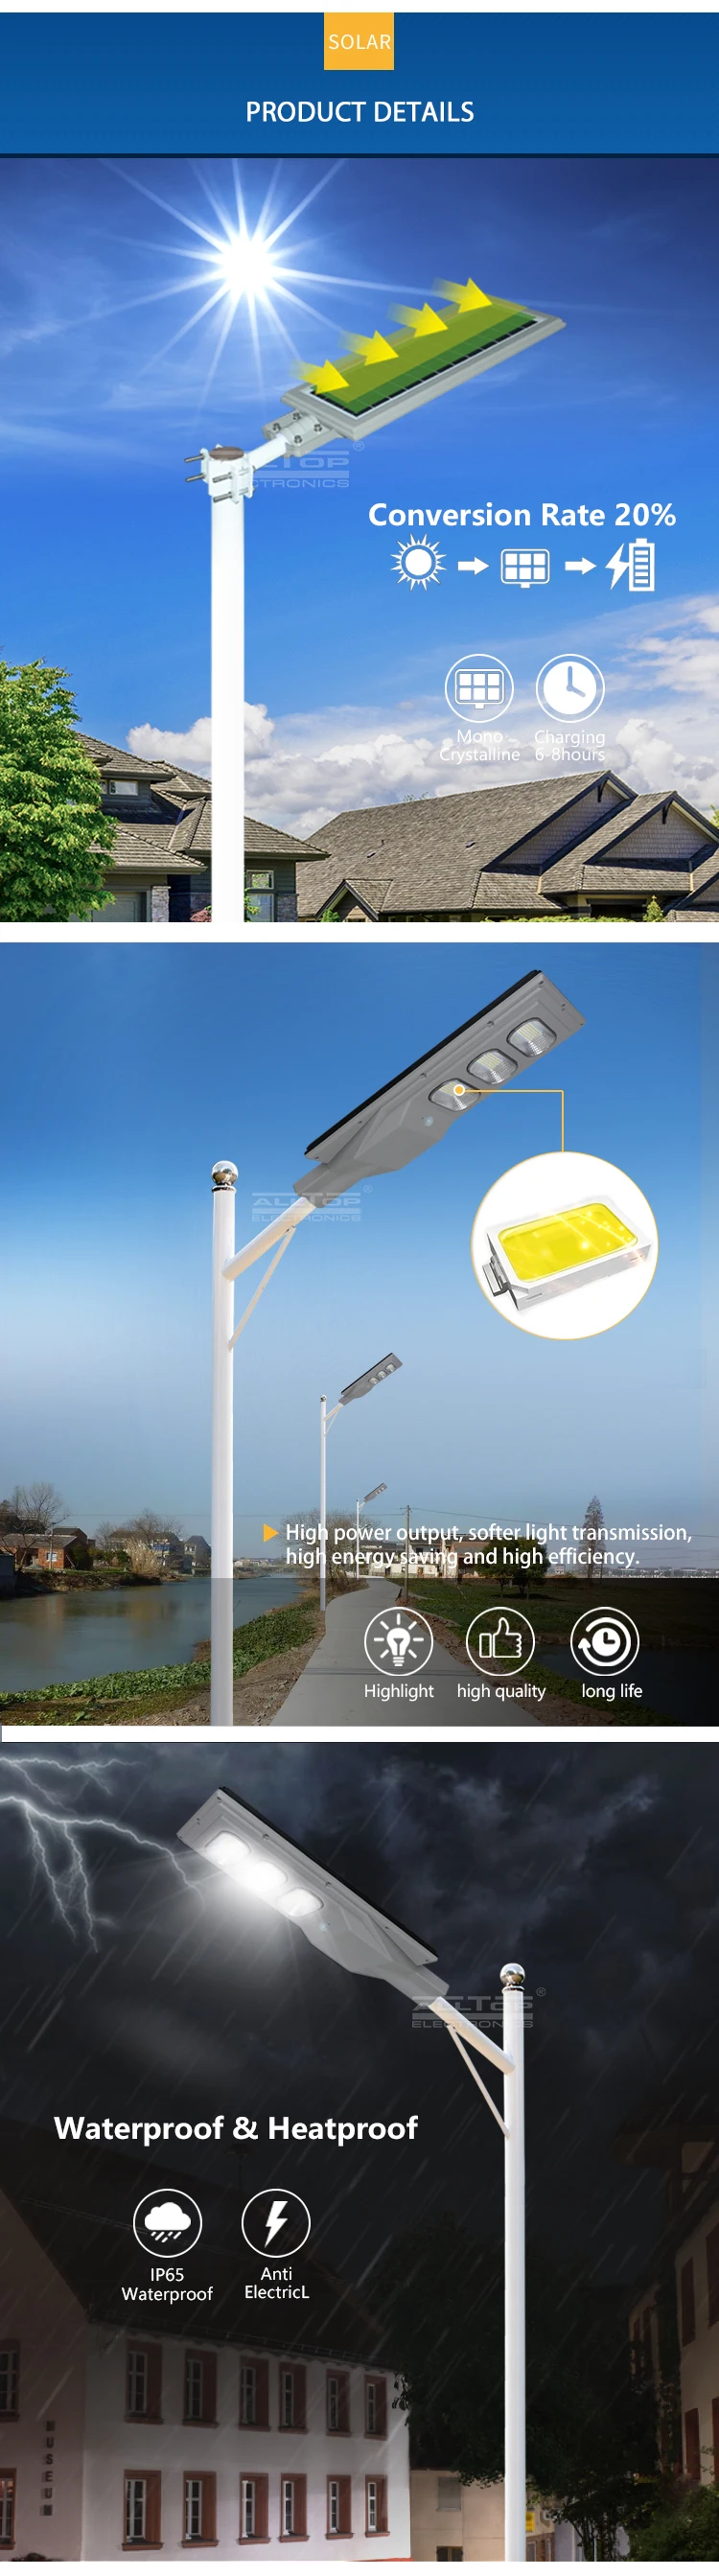 ALLTOP High efficiency solar powered panel outdoor 30w 60w 90w 120w 150w all in one led street lamp